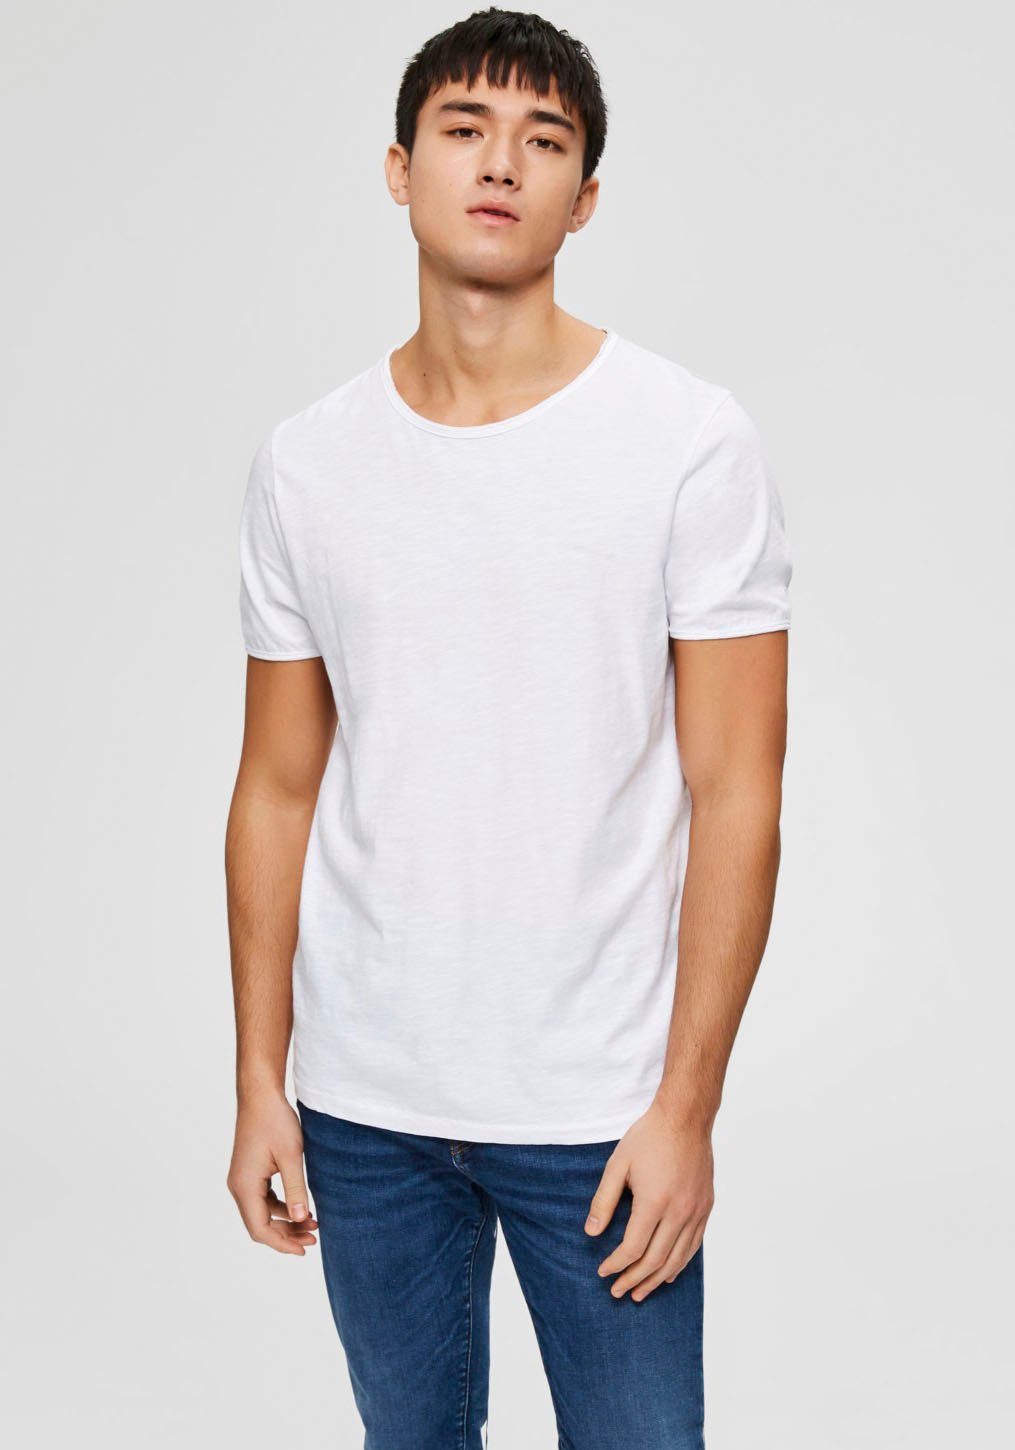 White O-NECK T-Shirt Bright SELECTED MORGAN TEE HOMME